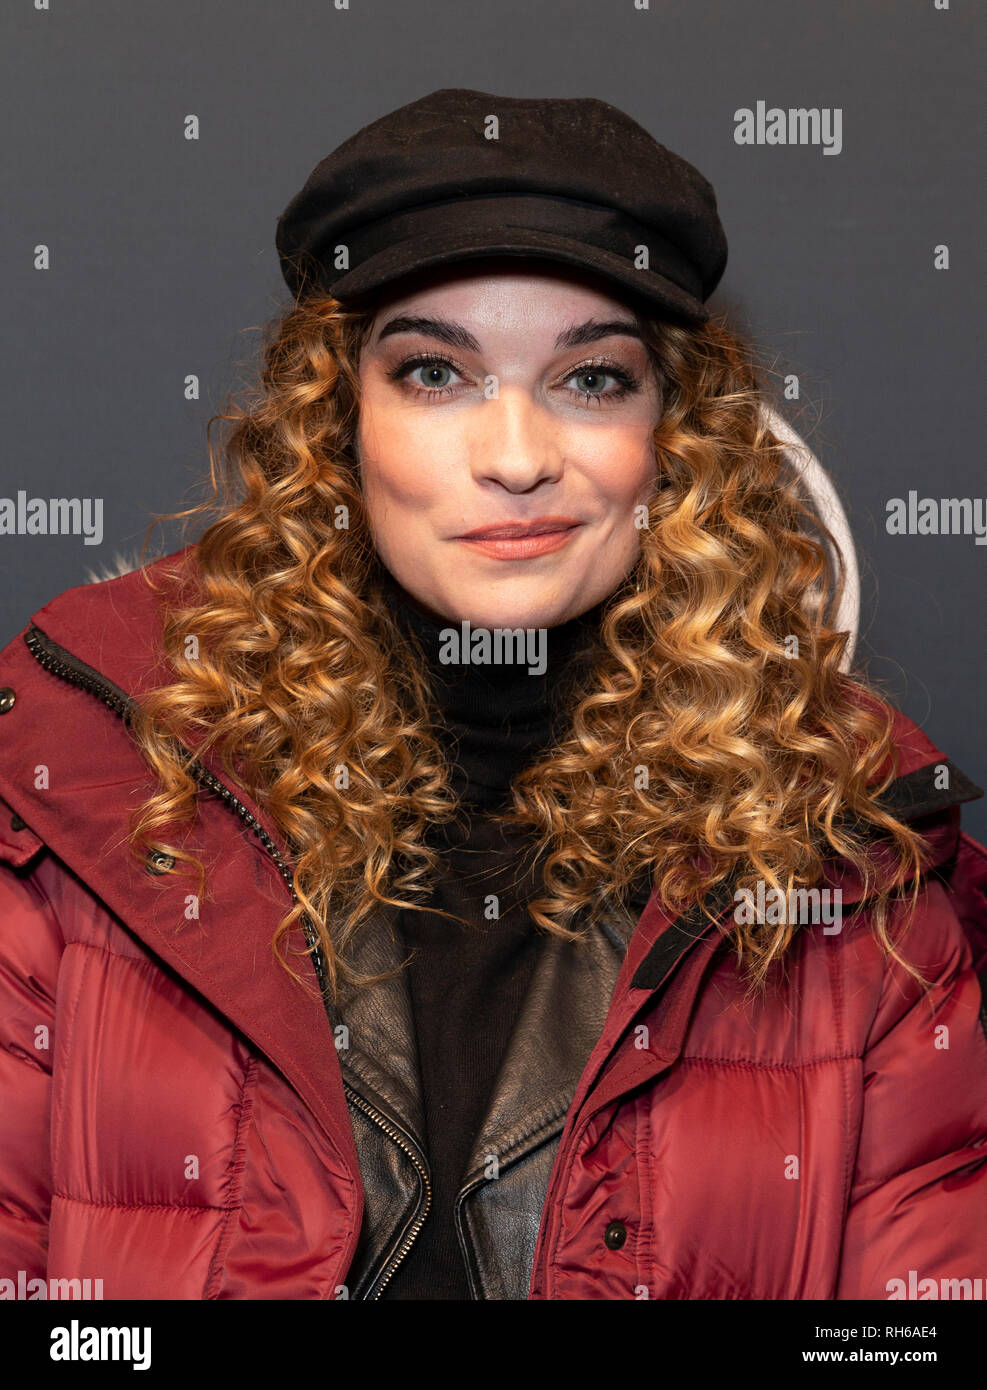 New York, NY - January 31, 2019: Annie Murphy attends Canada Goose Celebrates the Launch of Project Atigi at Studio 525 Credit: lev radin/Alamy Live News Stock Photo